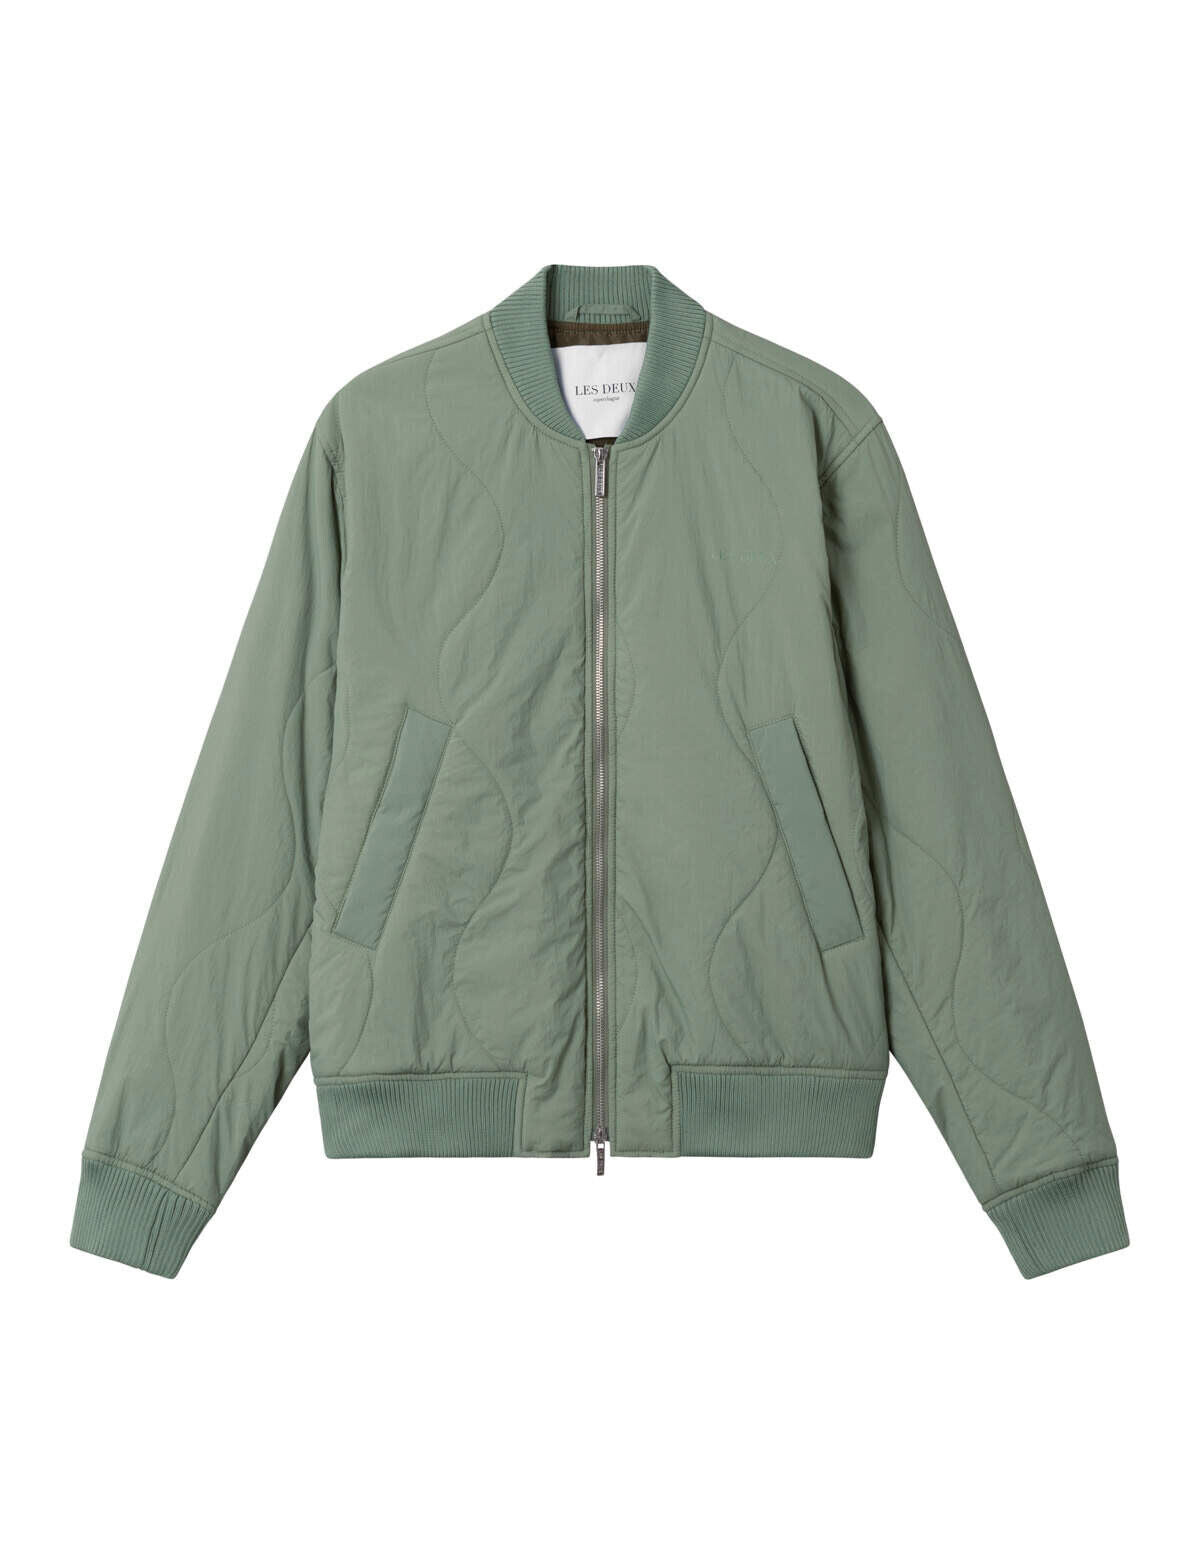 NORMAN QUILTED BOMBER JACKET